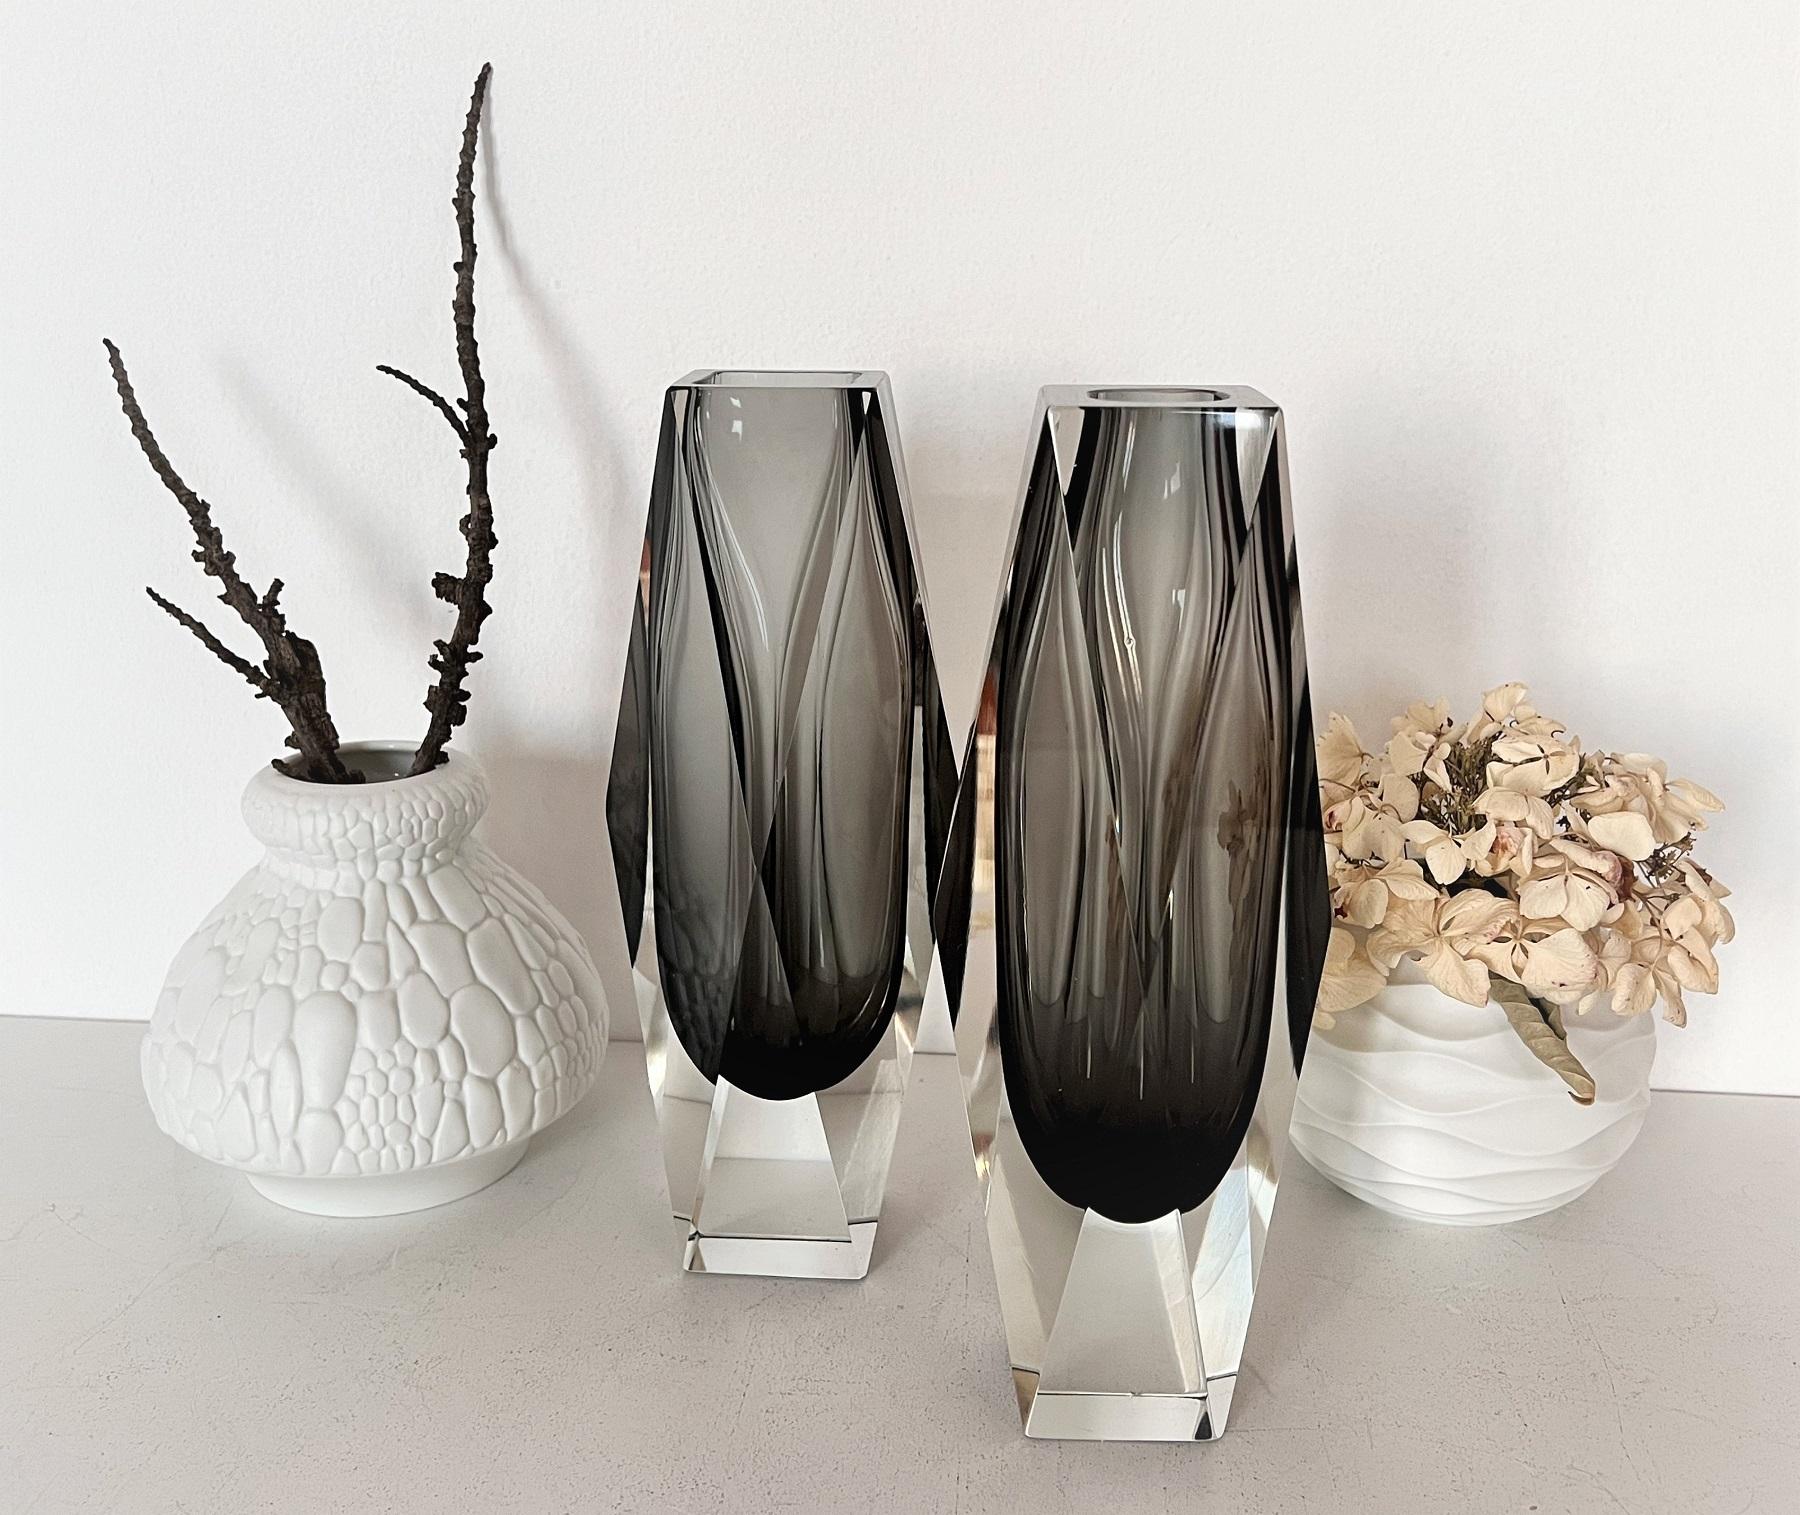 Beautiful set of two crystal vases Made in Murano, Italy, in the 1960s.
Typical shape and form of Flavio Poli.
Both vases have similar - same sizes and colors, but are slightly different in shape.
Matching excellent together in a nice set.
They